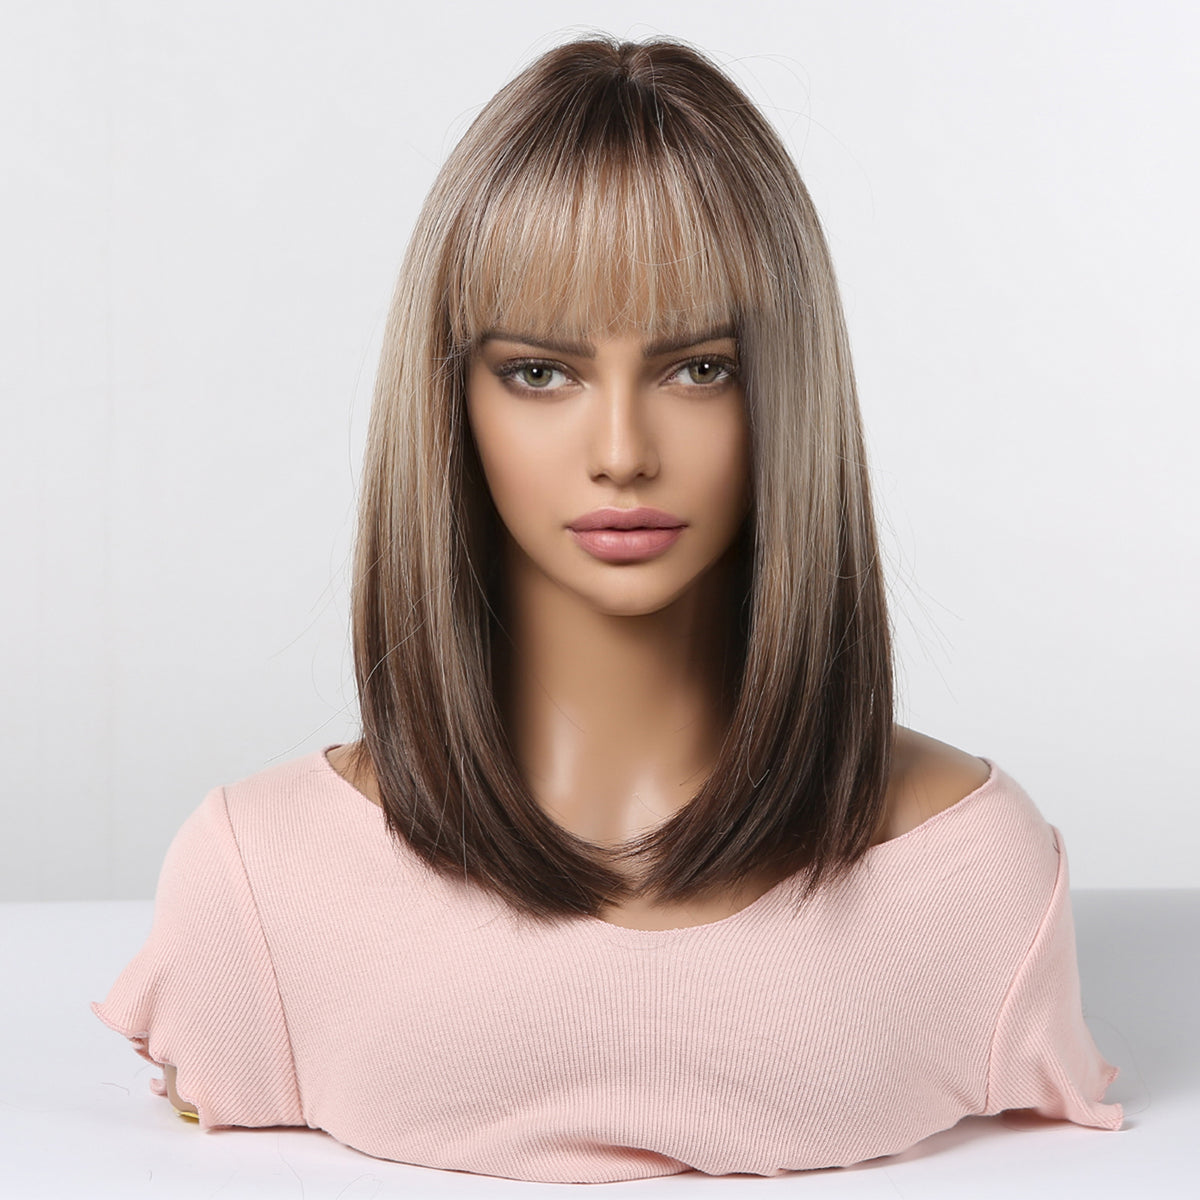 【Luna 27】 Haircube Short Obmre Gray Brown Straight Wig Natural Fanshion LC2067-1